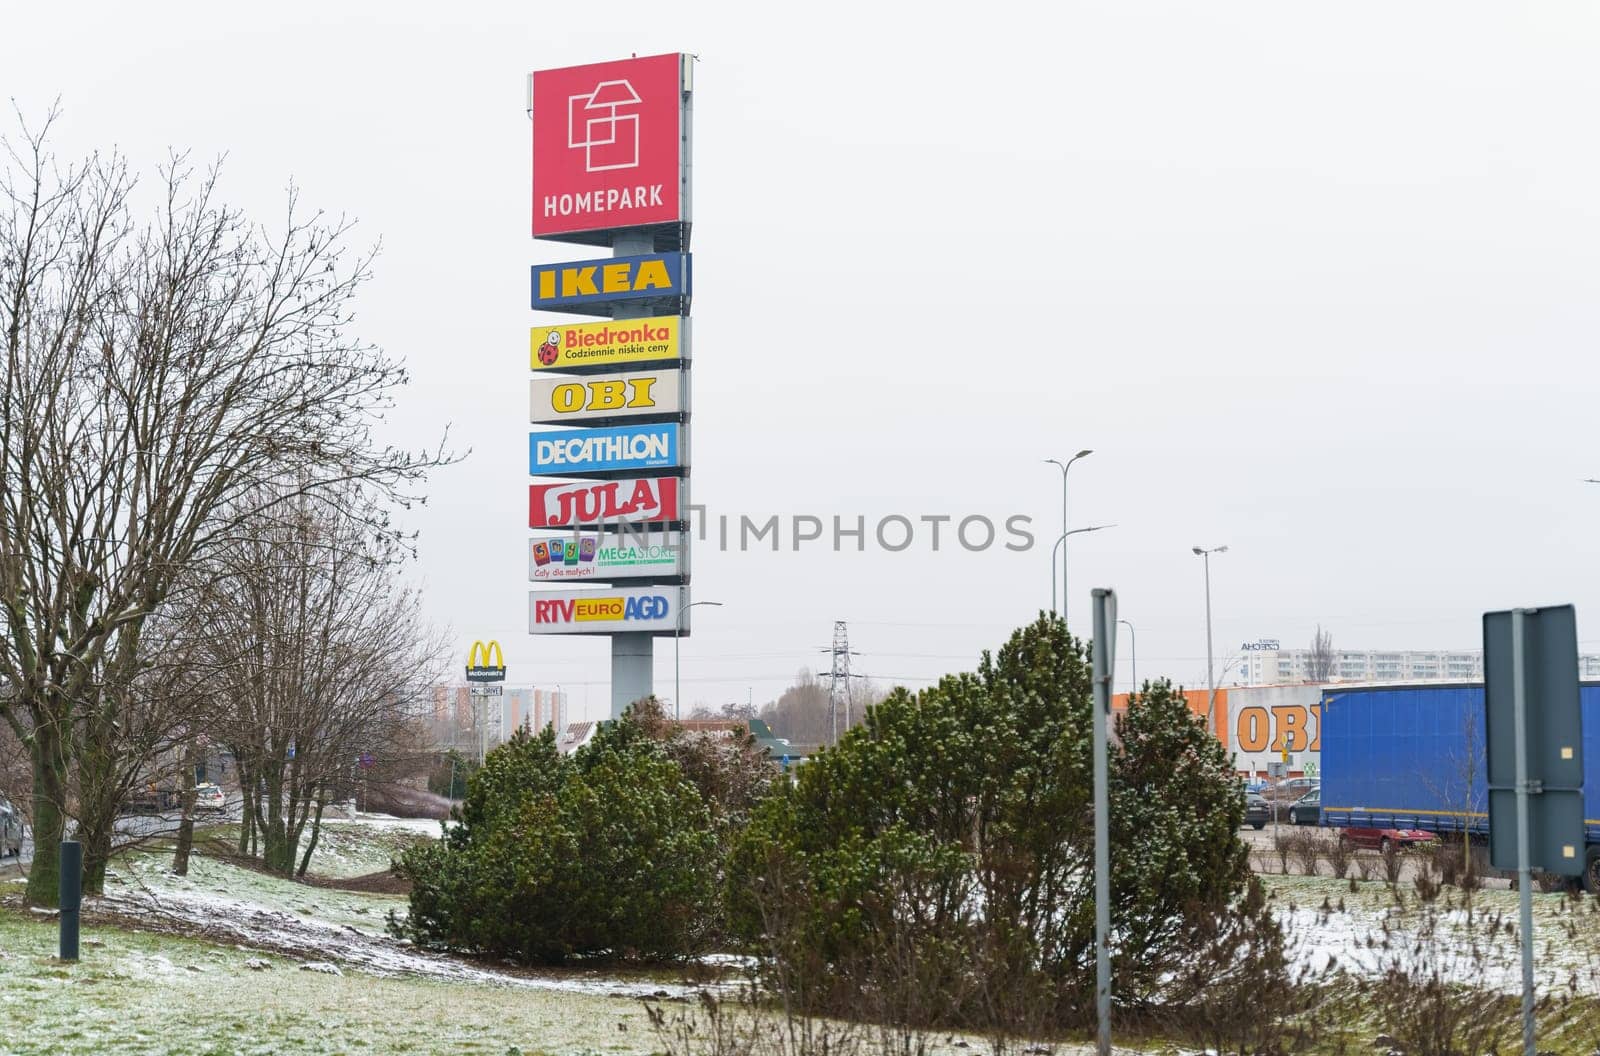 Advertising pointer along the location of branded stores. by Sd28DimoN_1976